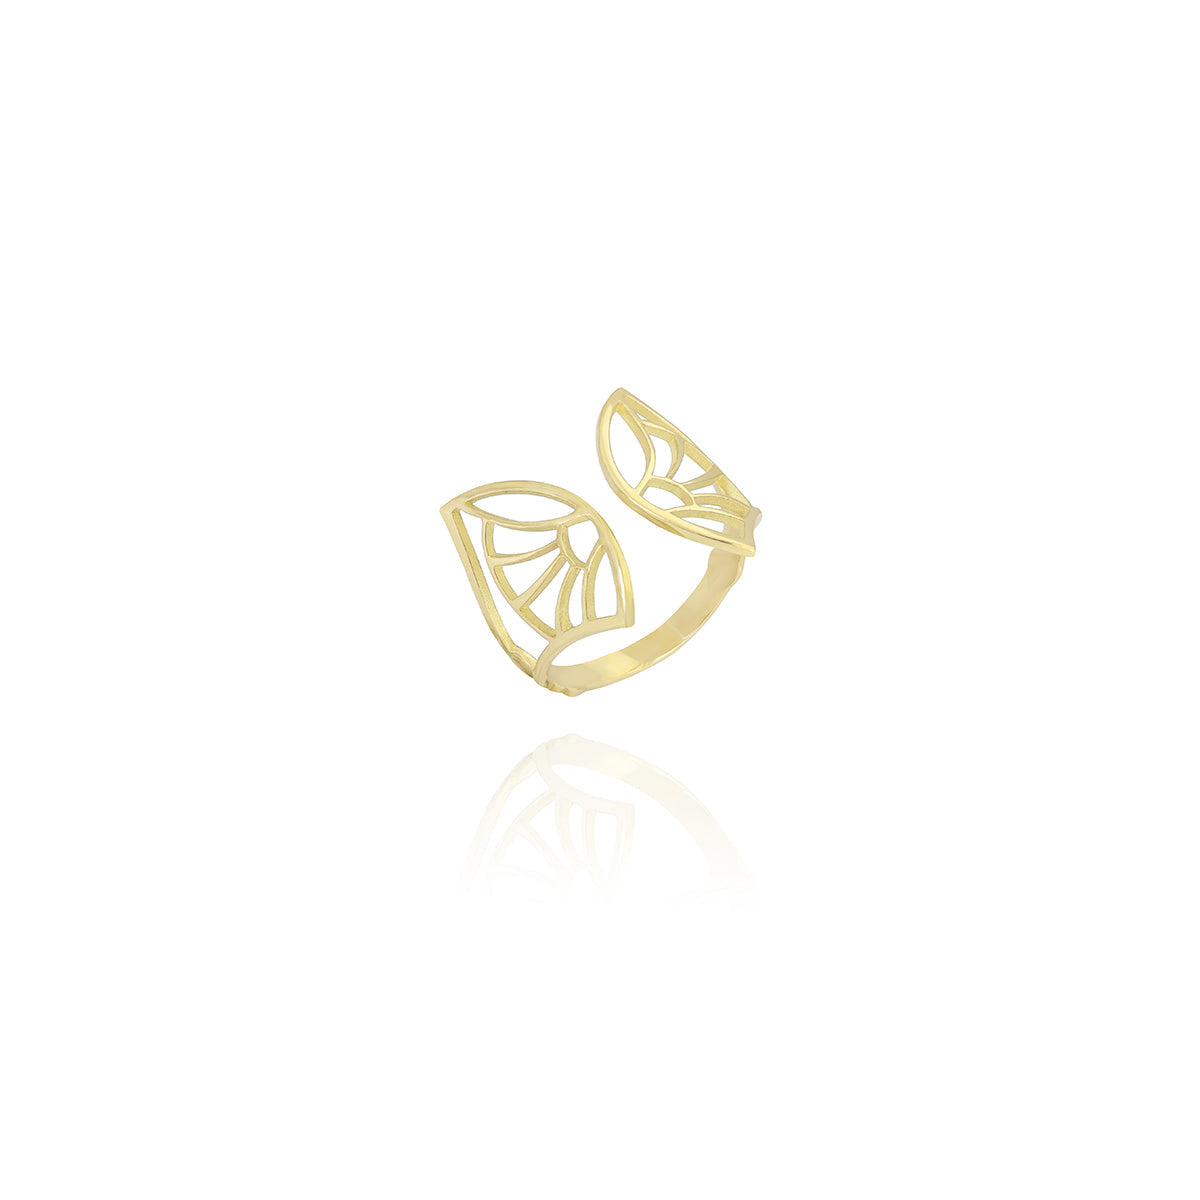 Louts Flower Cuff Ring in 18k Yellow gold